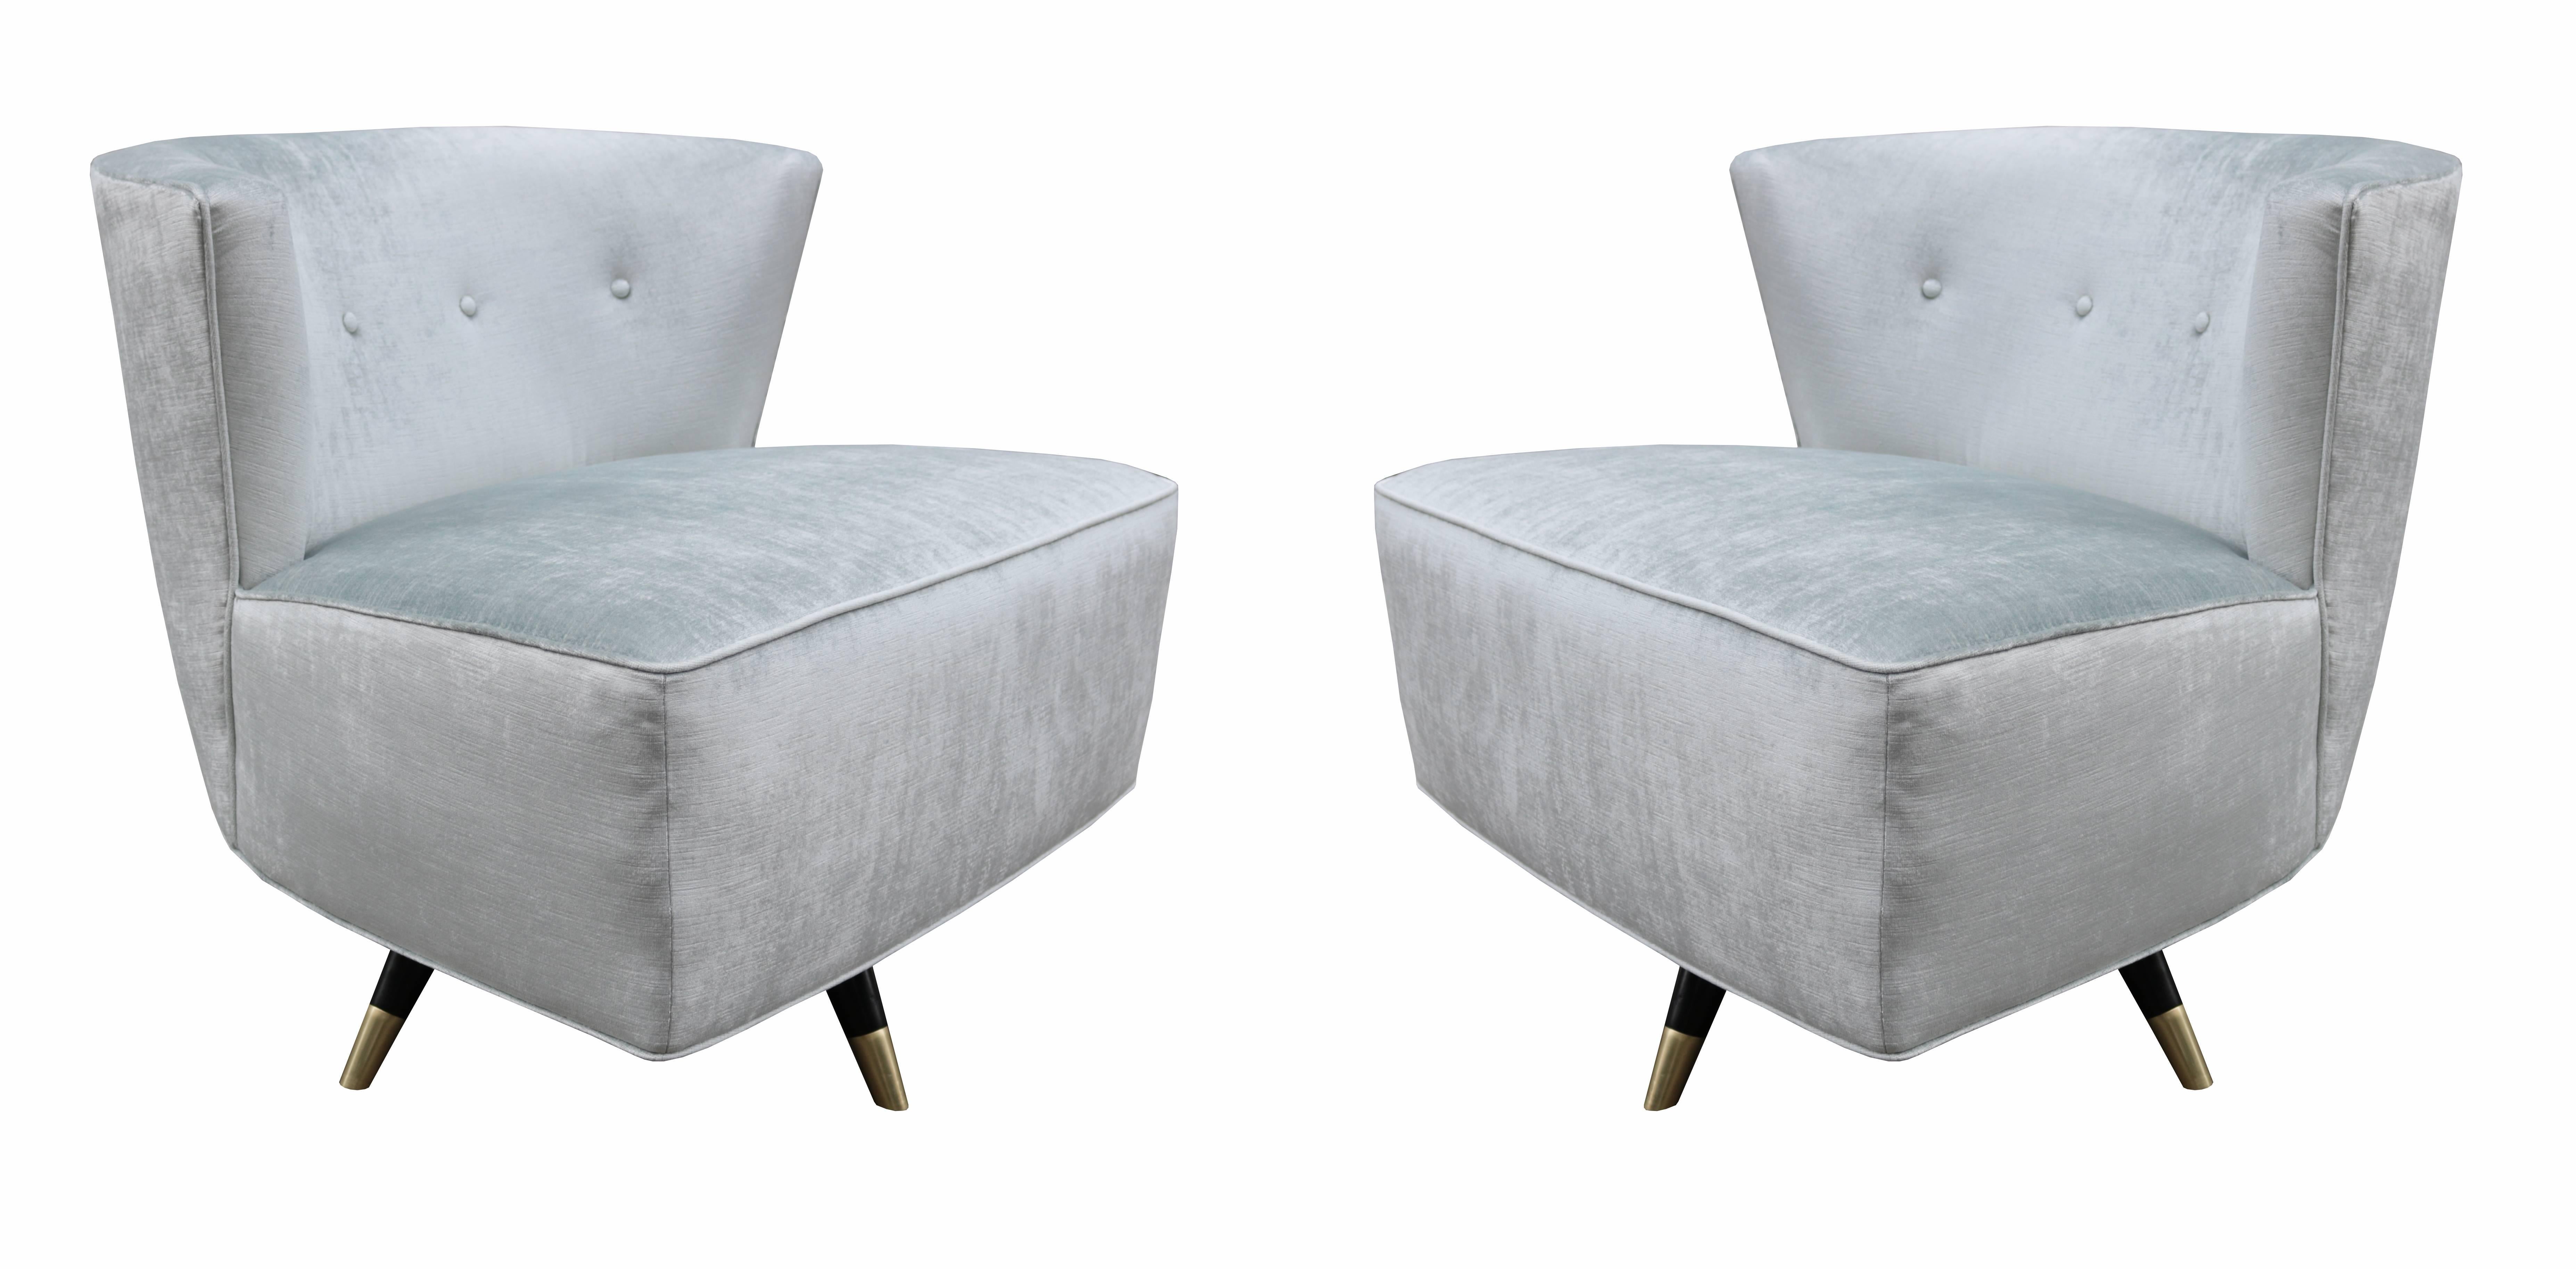 A pair of midcentury low swivel chairs.
Upholstered with ebonized legs 
and patinated brass sabots.
Completely restored.